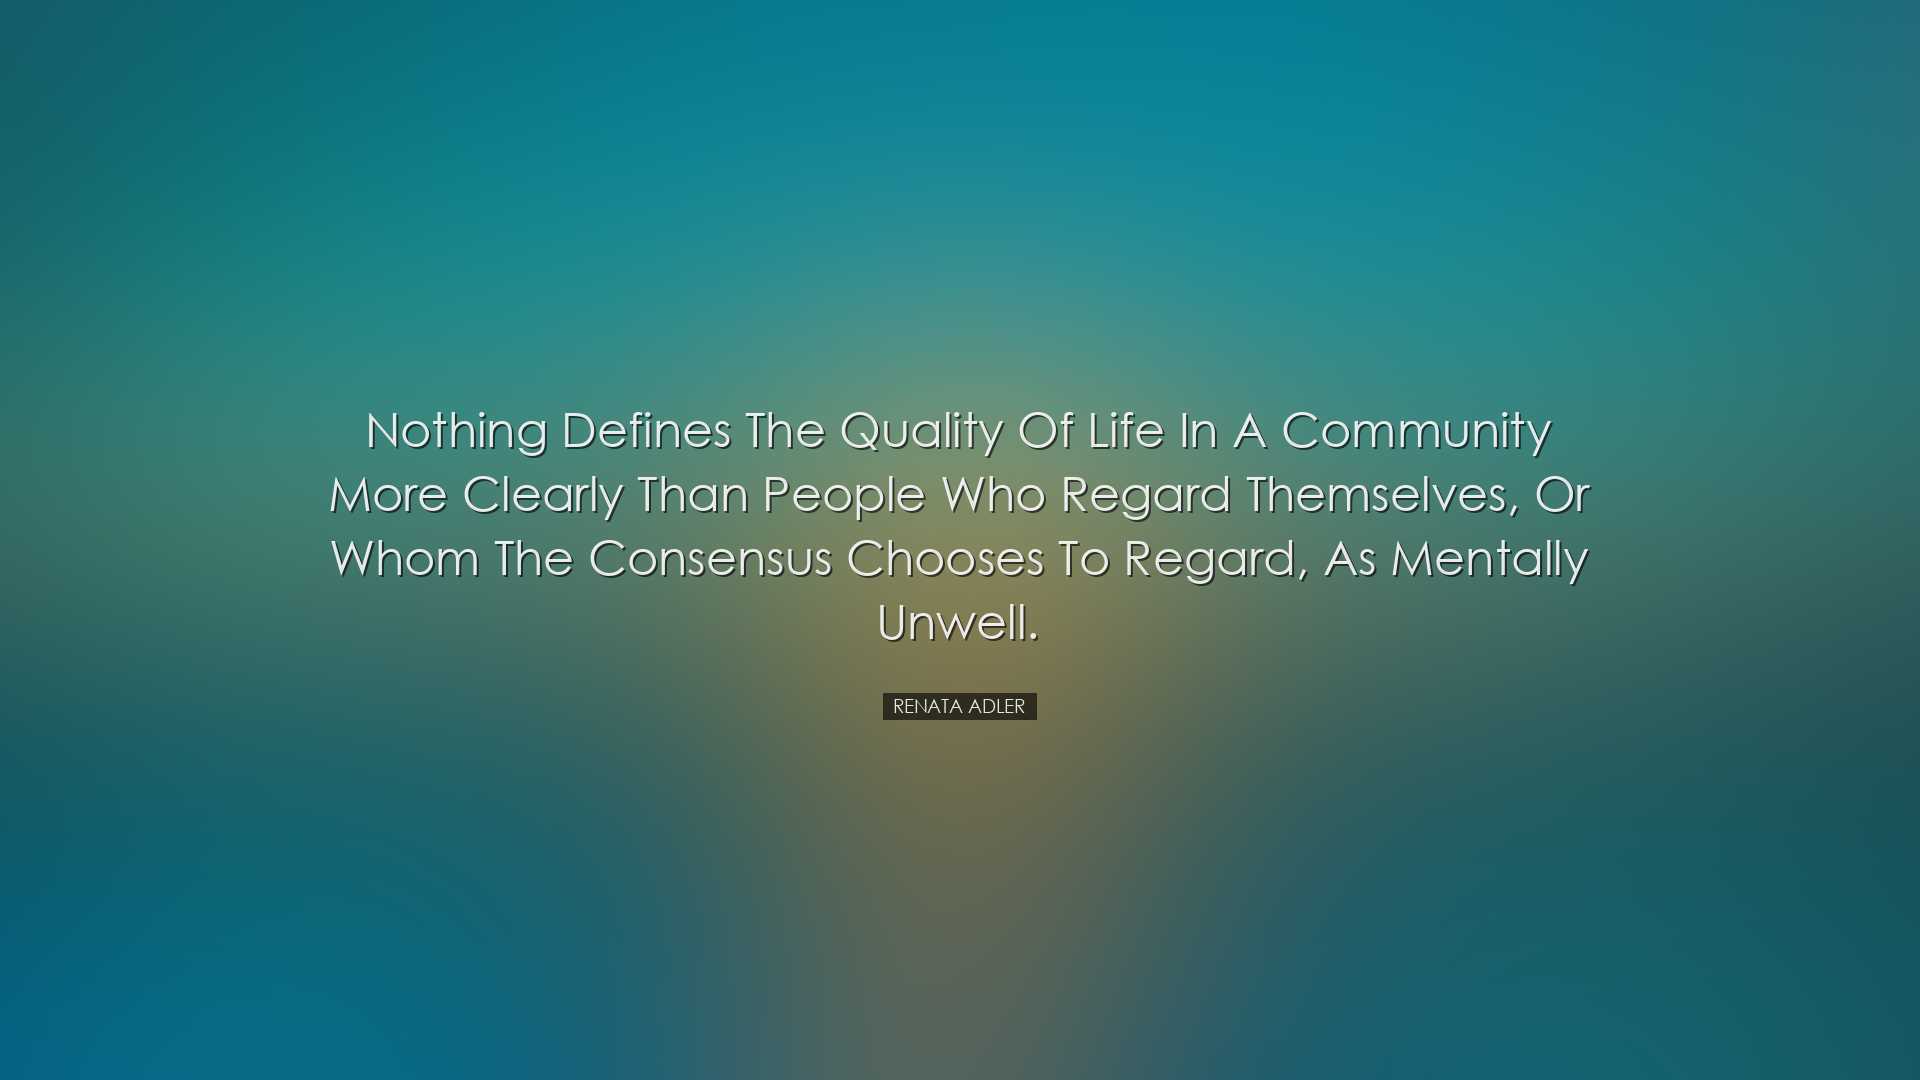 Nothing defines the quality of life in a community more clearly th